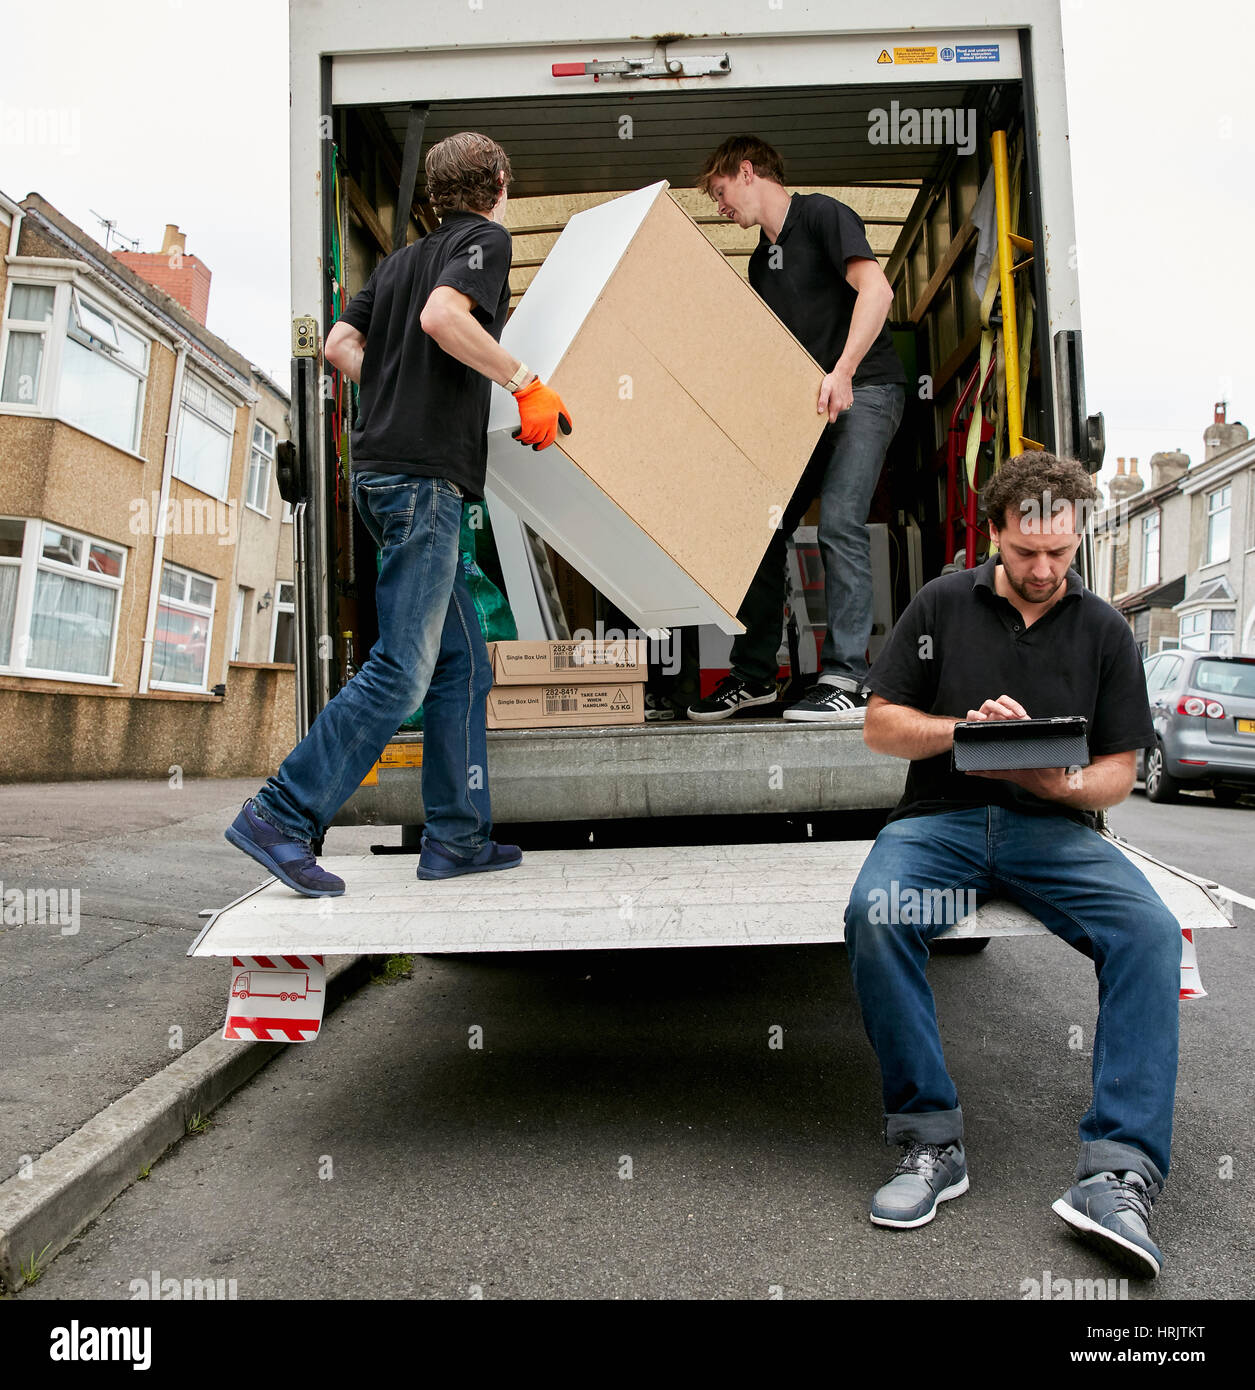 Removals business. A removals company, two men lifting furniture and one seated using a digital tablet. Stock Photo